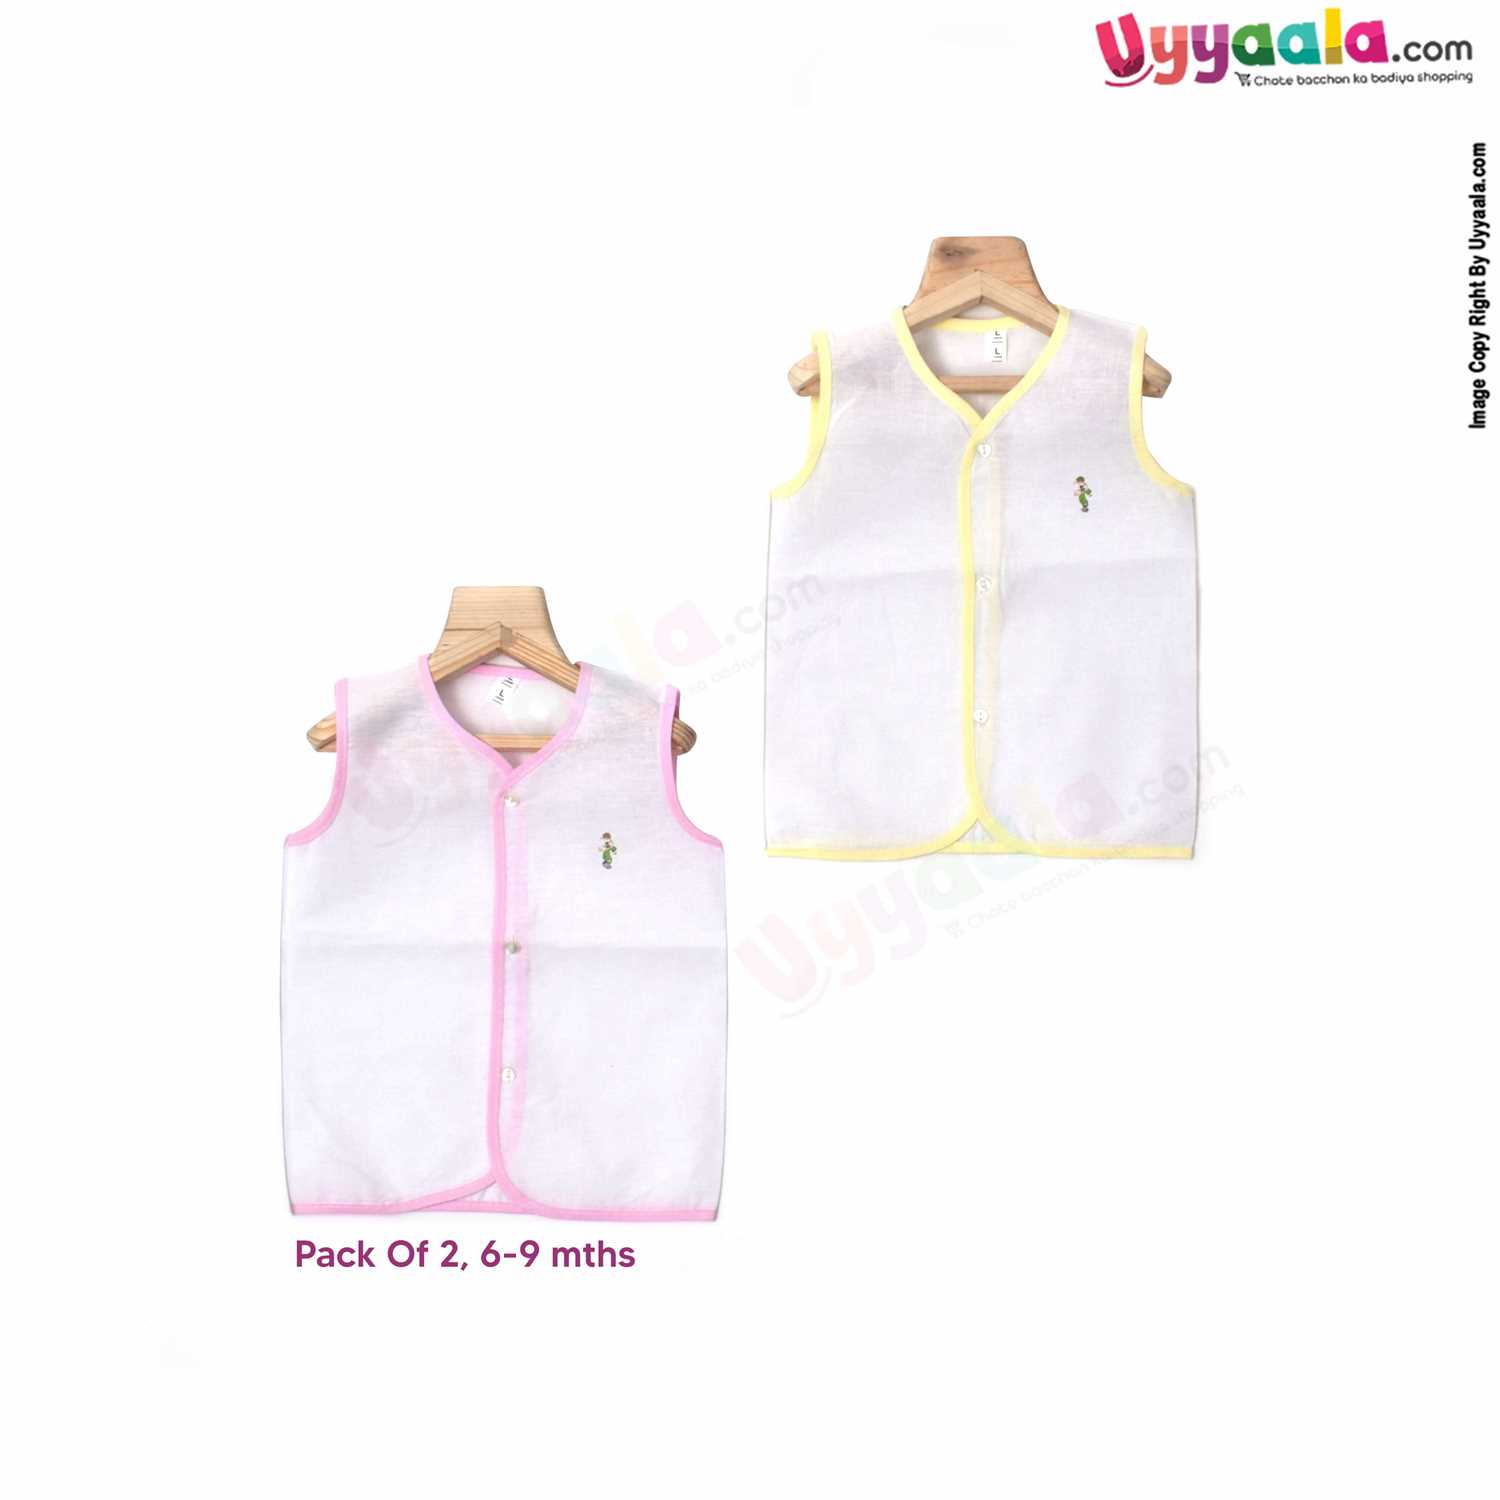 POLAR CUBS Sleeveless Baby Jabla Set, Front Opening Button Model, Premium Quality Cotton Baby Wear, (6-9M), 2Pack - White with Pink & Yellow Borders